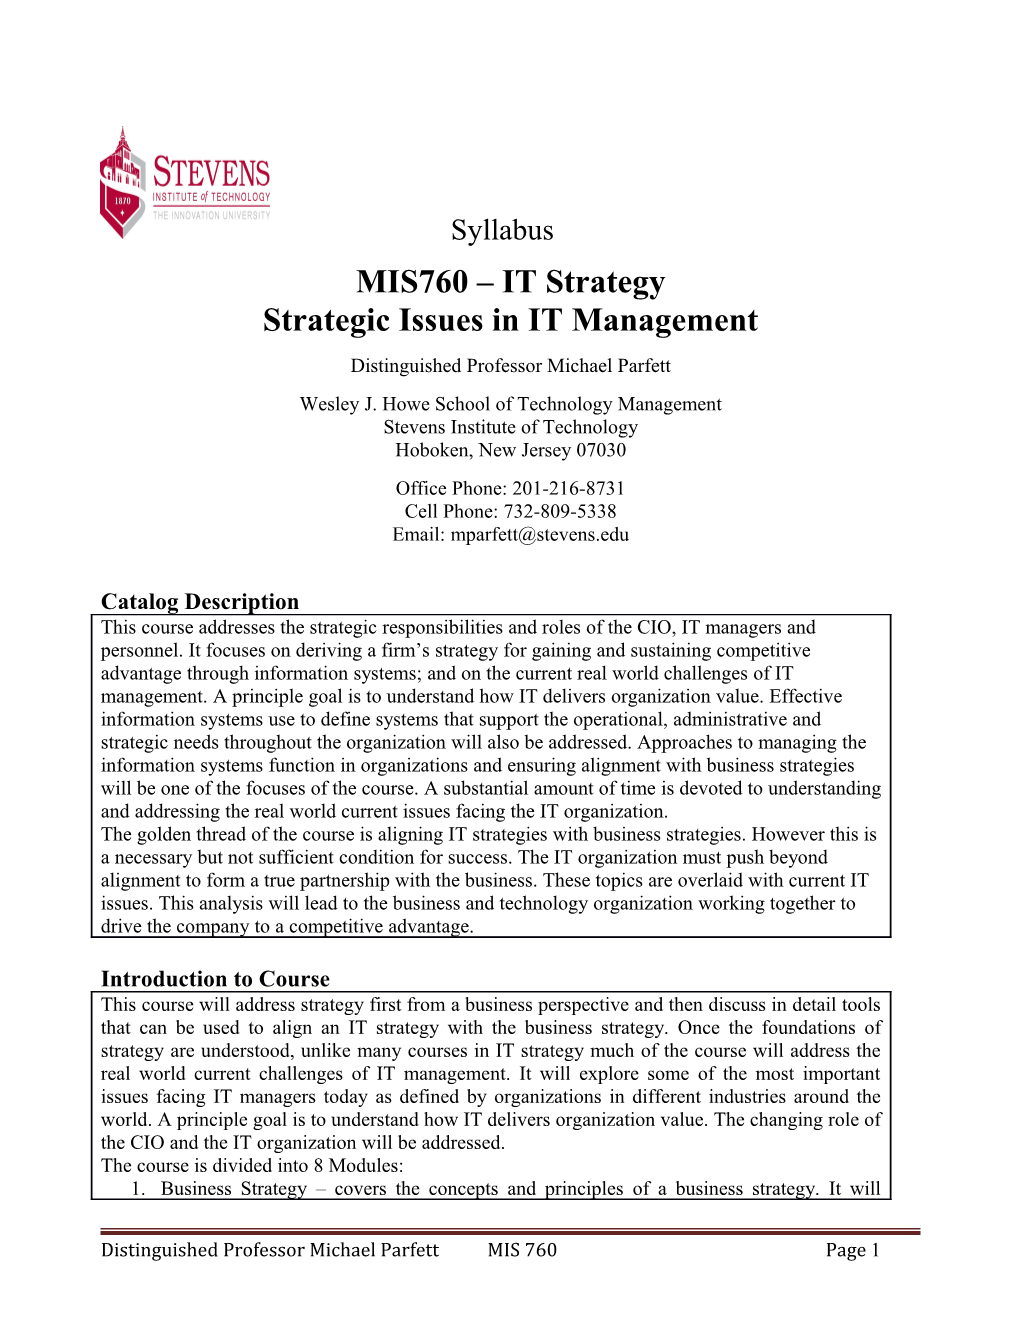 Strategic Issues in IT Management